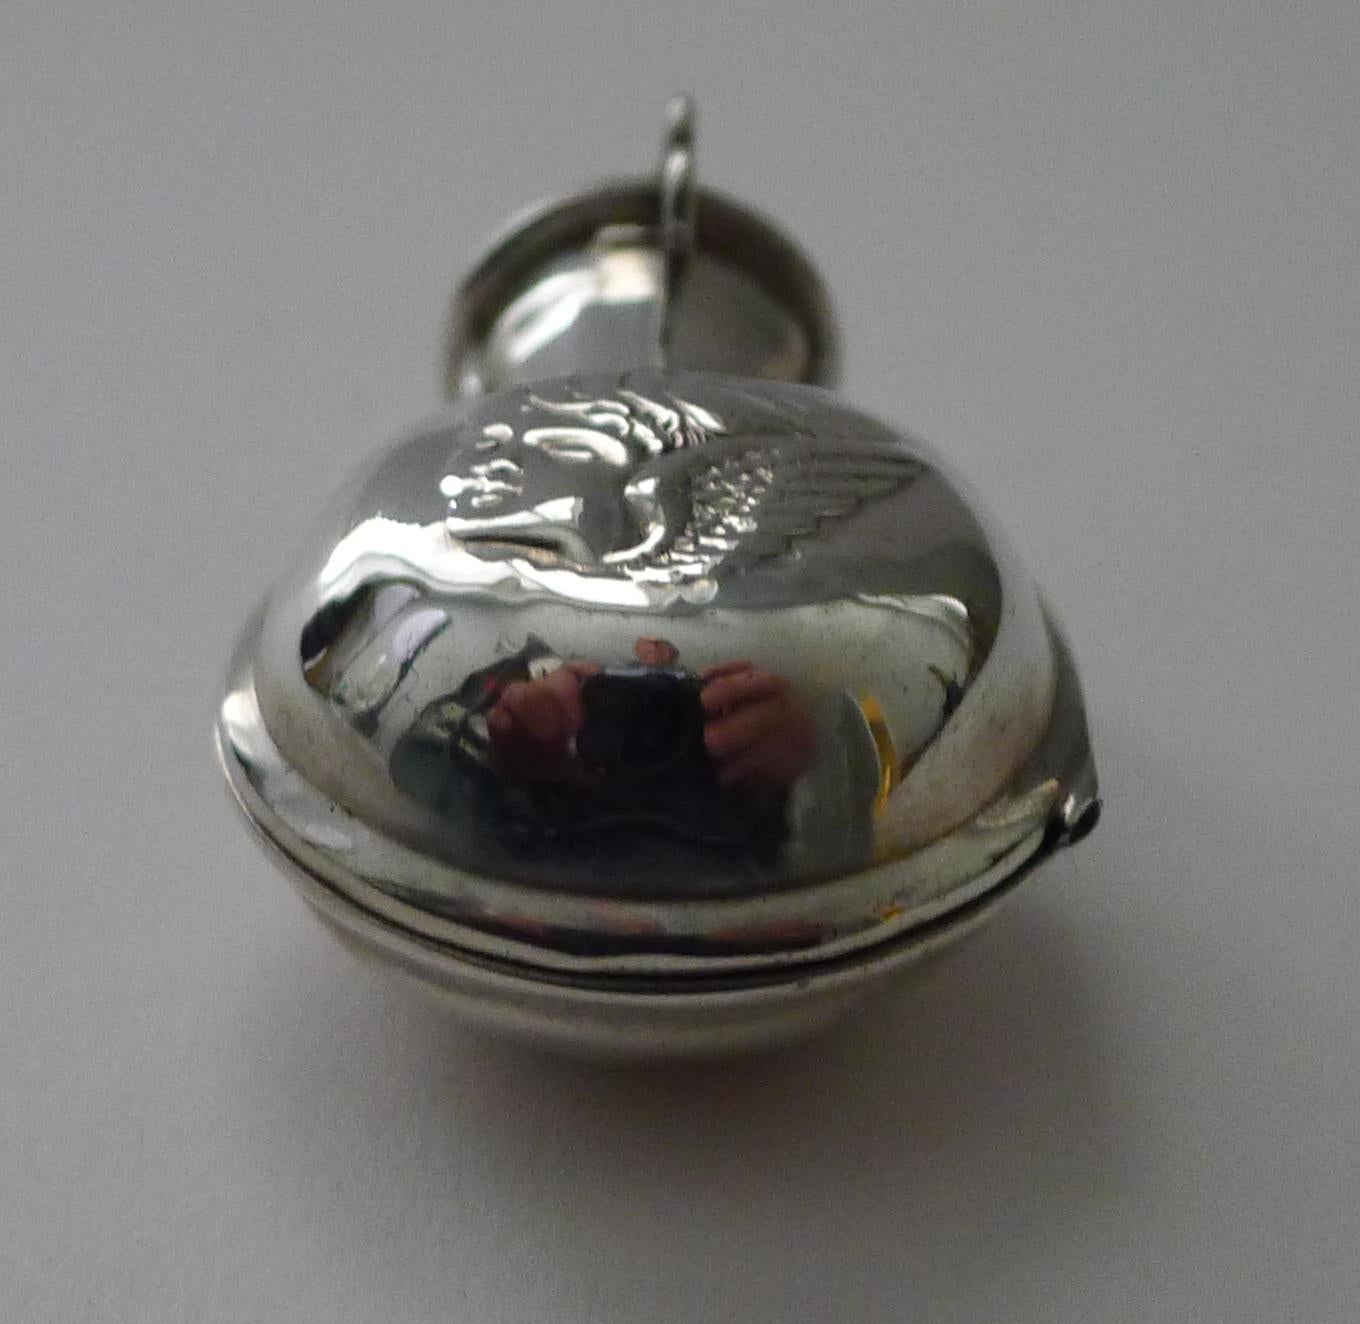 This type of scent bottle is always highly sought-after, being more unusual than most, this one is a more charming smaller example, they are usually larger in size.

The case is made from sterling silver with an embossed winged Cherub or Putti